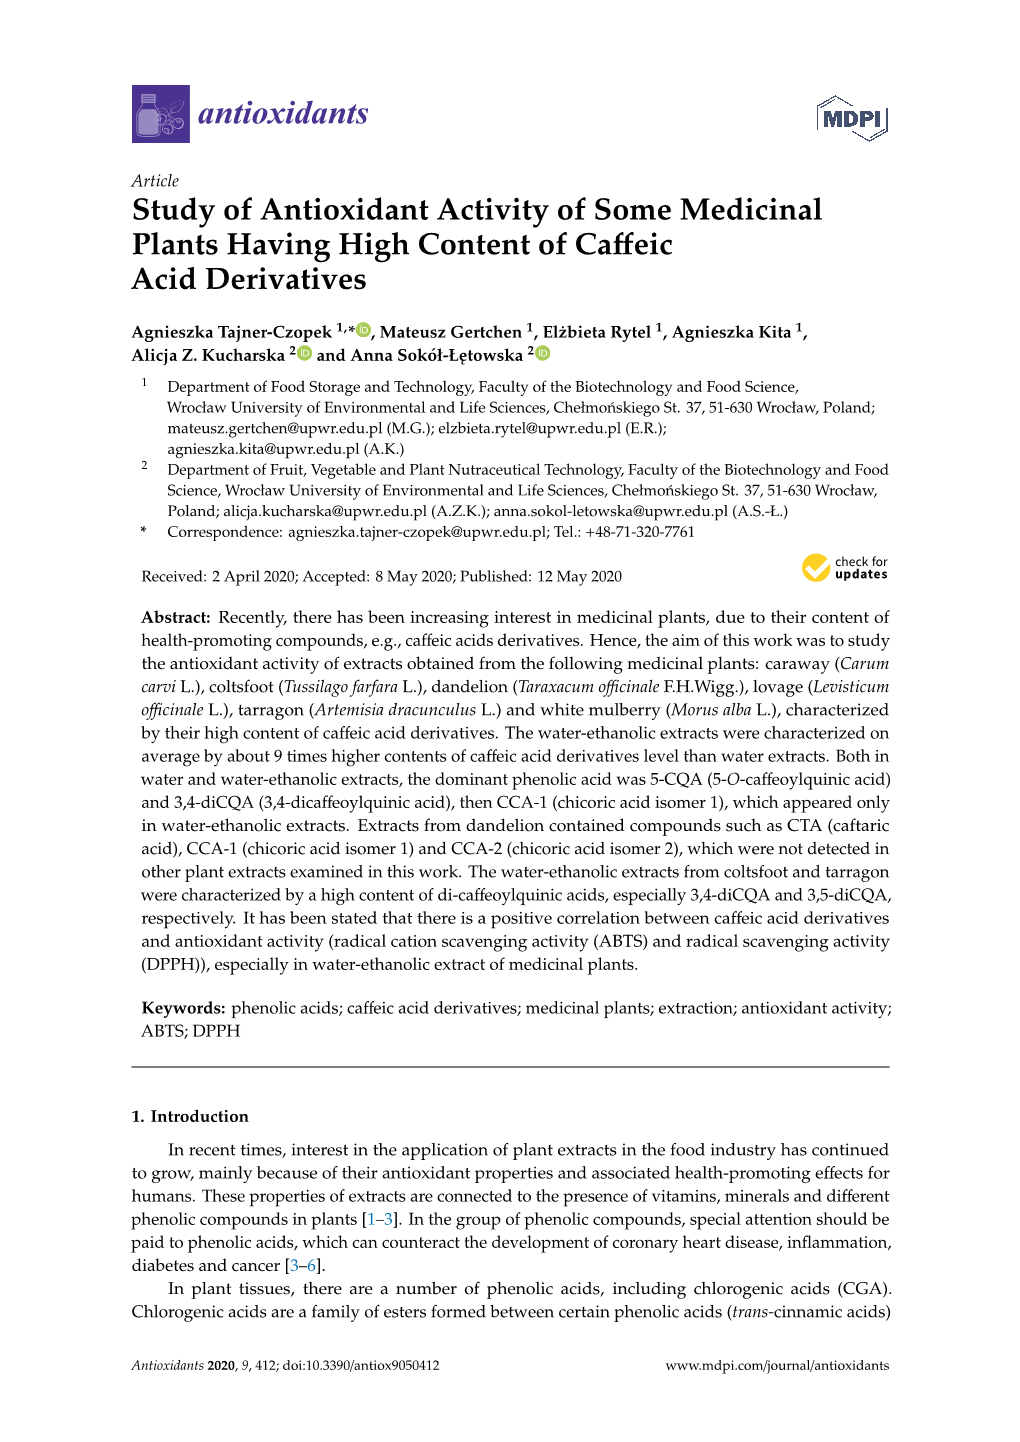 Study of Antioxidant Activity of Some Medicinal Plants Having High Content of Caﬀeic Acid Derivatives